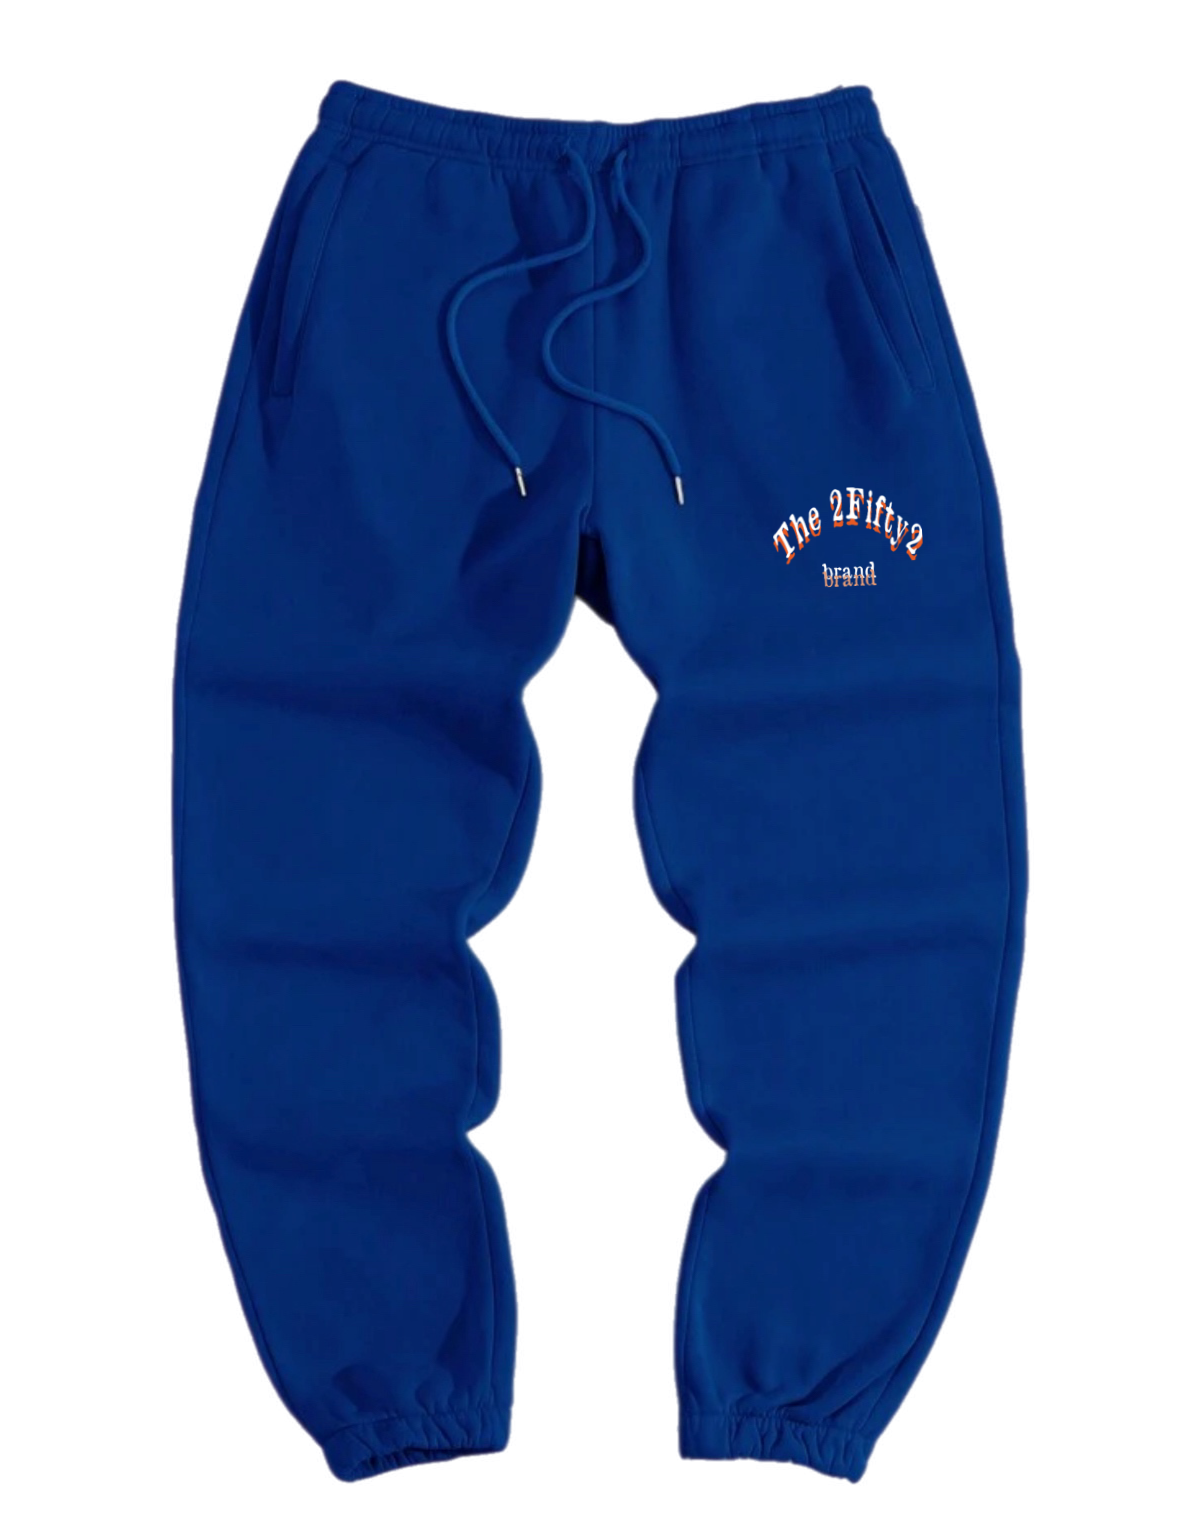 Men’s joggers sweatsuit by The 2fifty2 brand